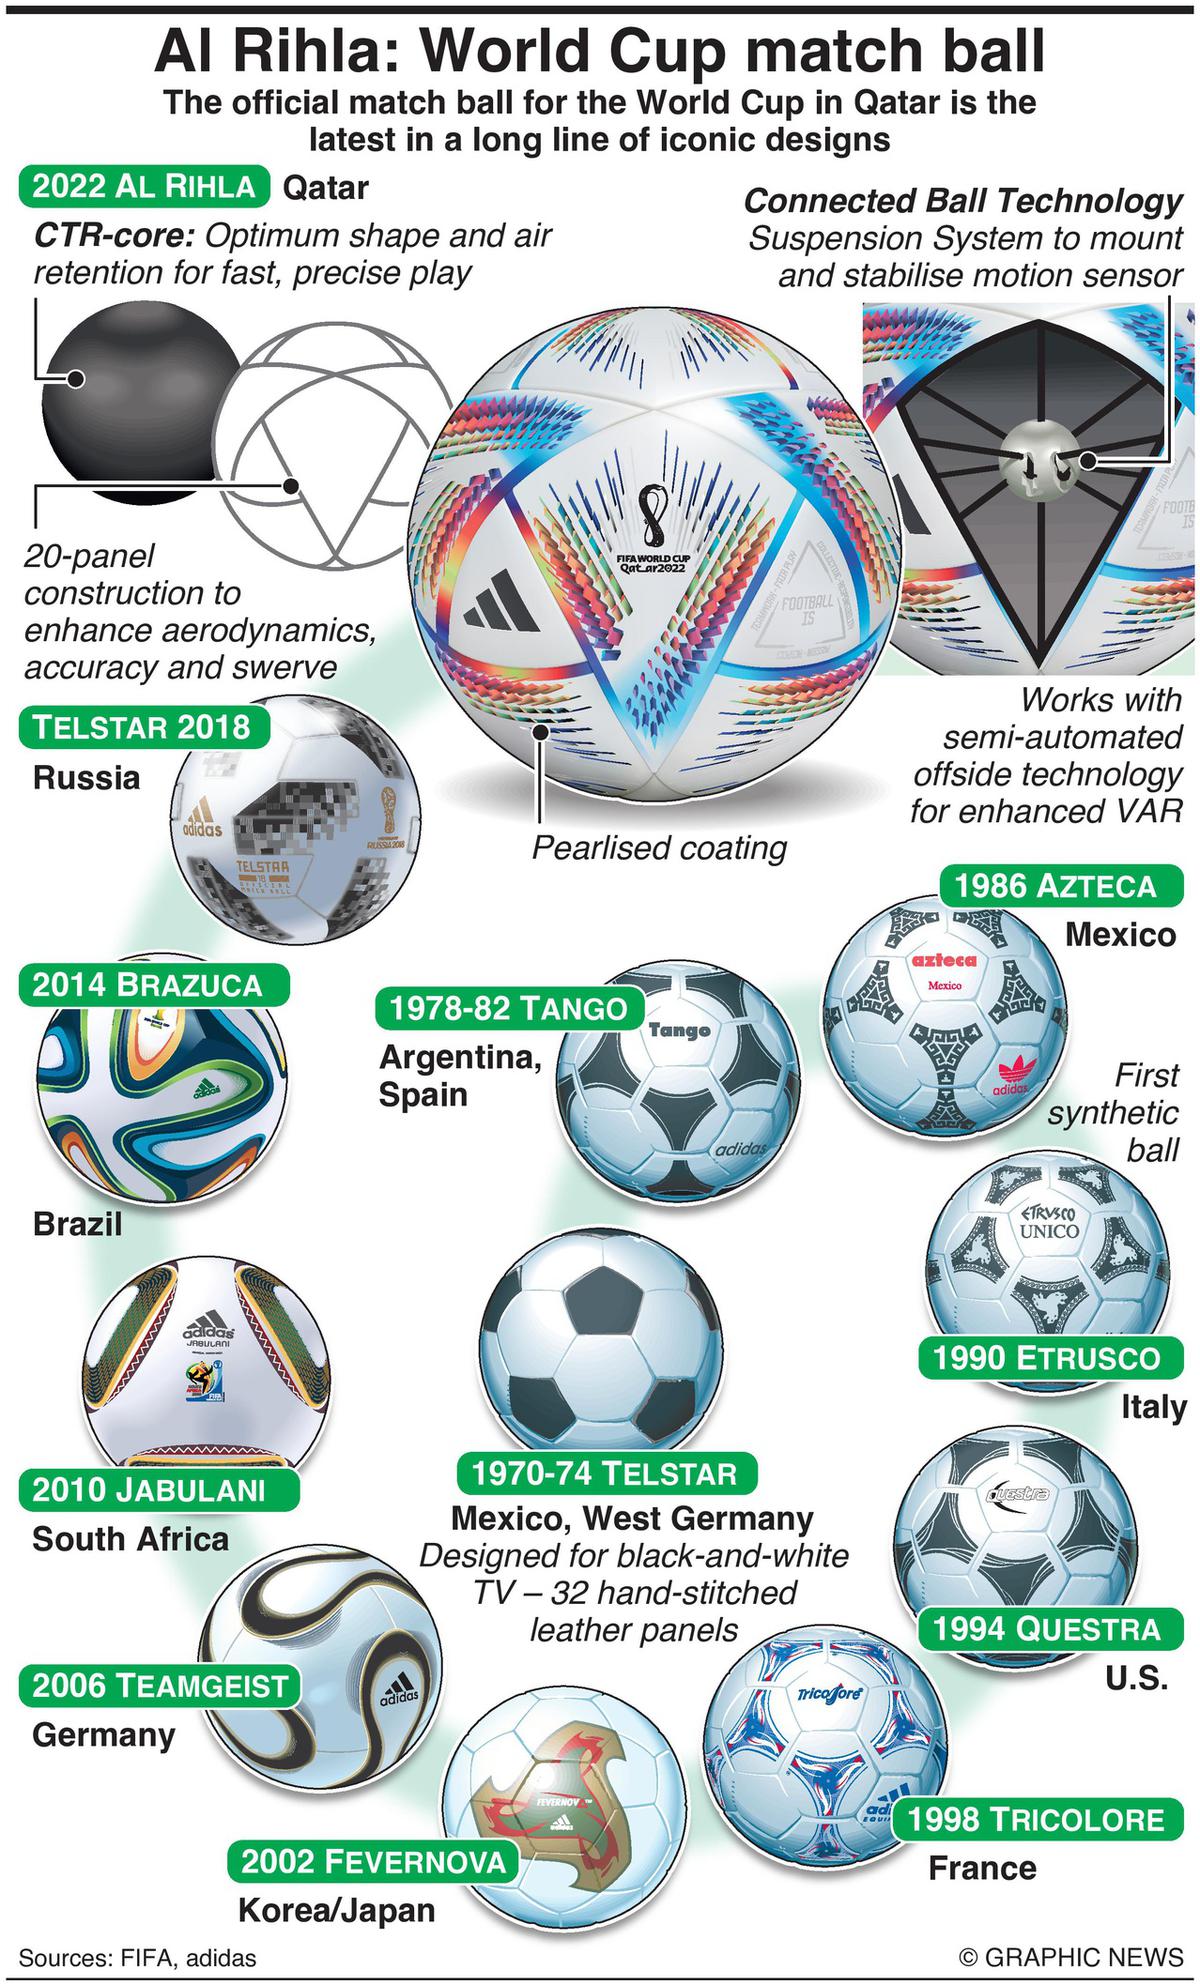 Official World Cup 1998 Tricolore Soccer Ball 